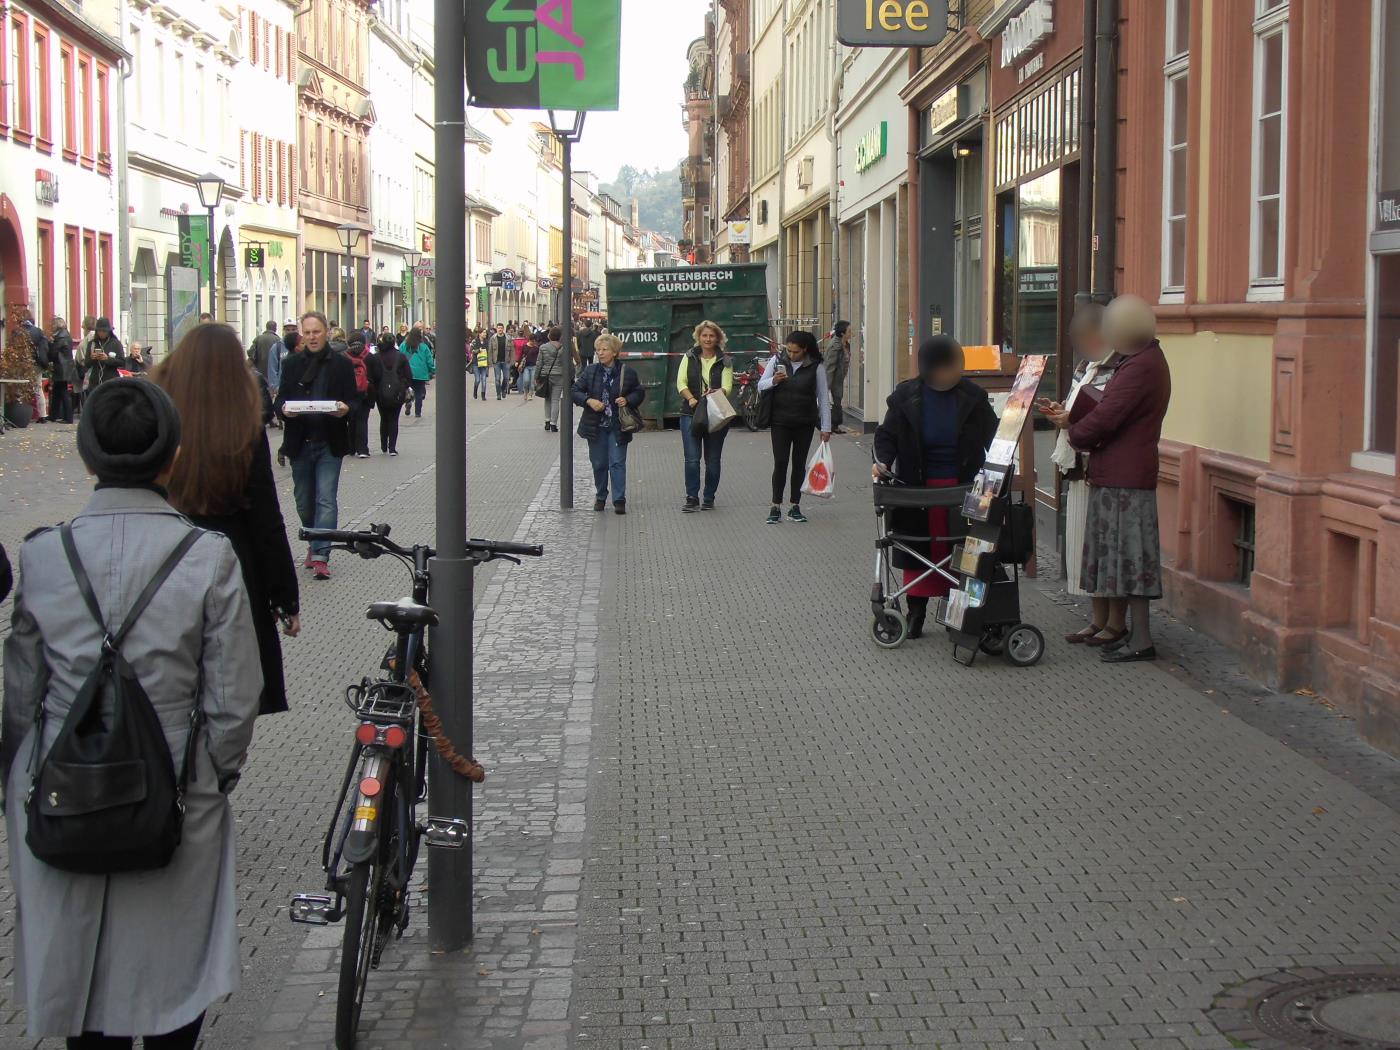 Jehovah's Witnesses in Heidelberg now only embarrassing